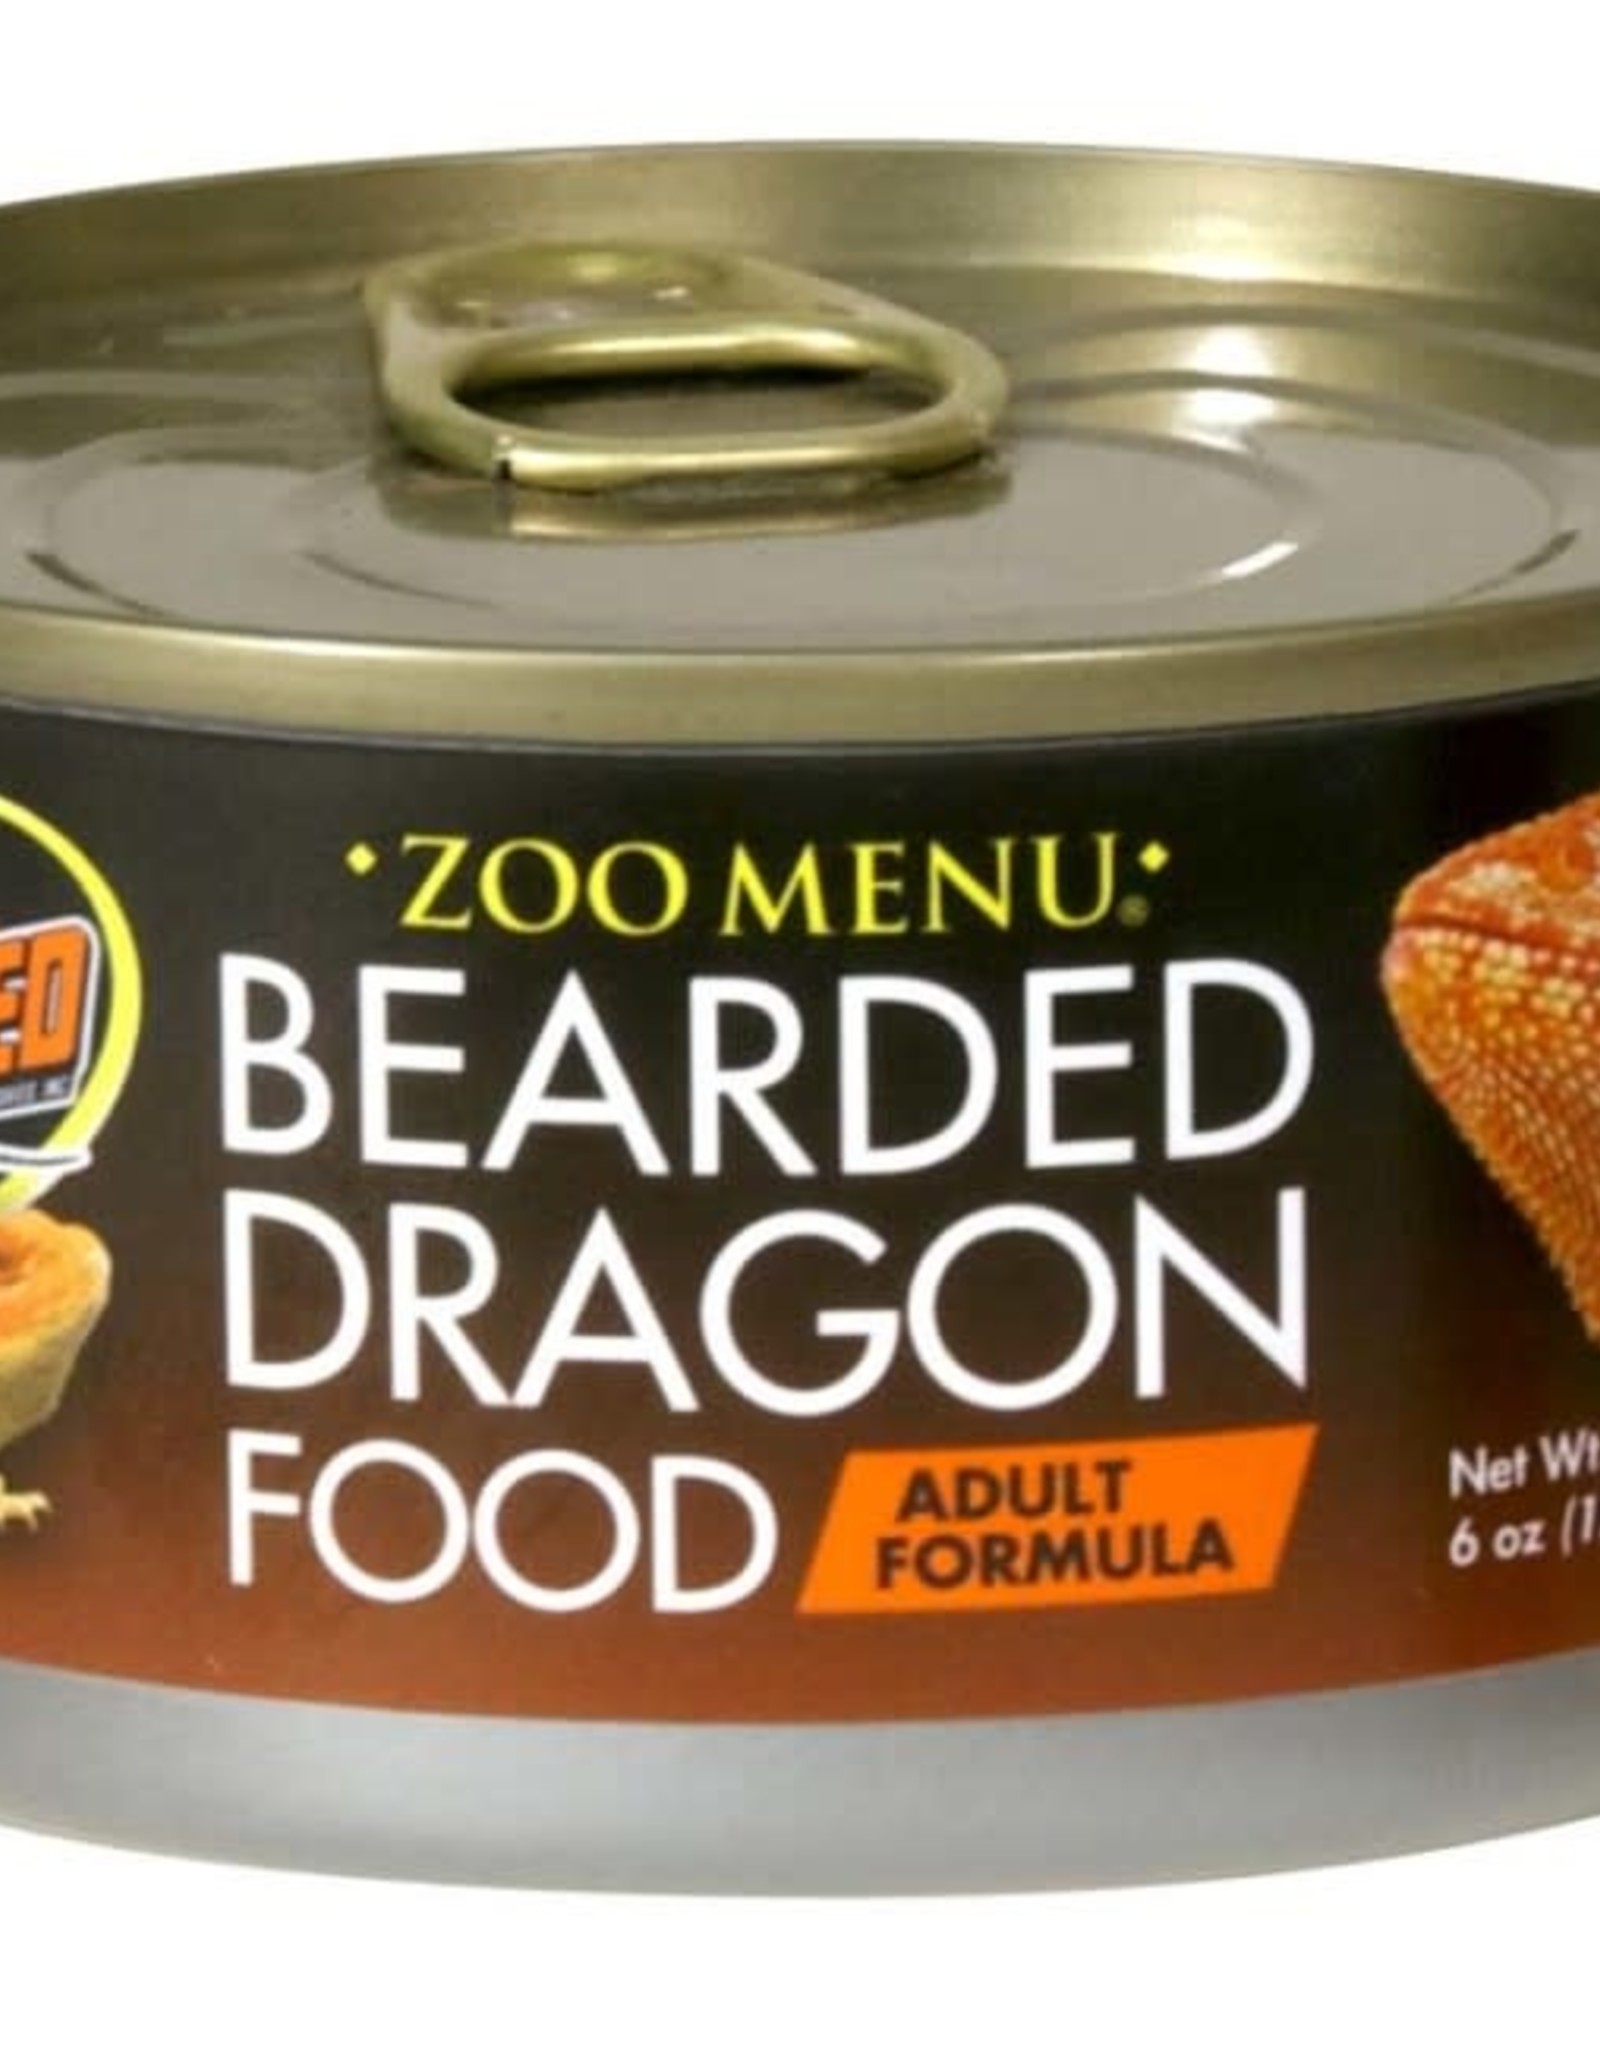 ZOO MED LABORATORIES, INC. ZOO MED ZM-72- CANNED FOOD- BEARDED DRAGON- 6 OZ